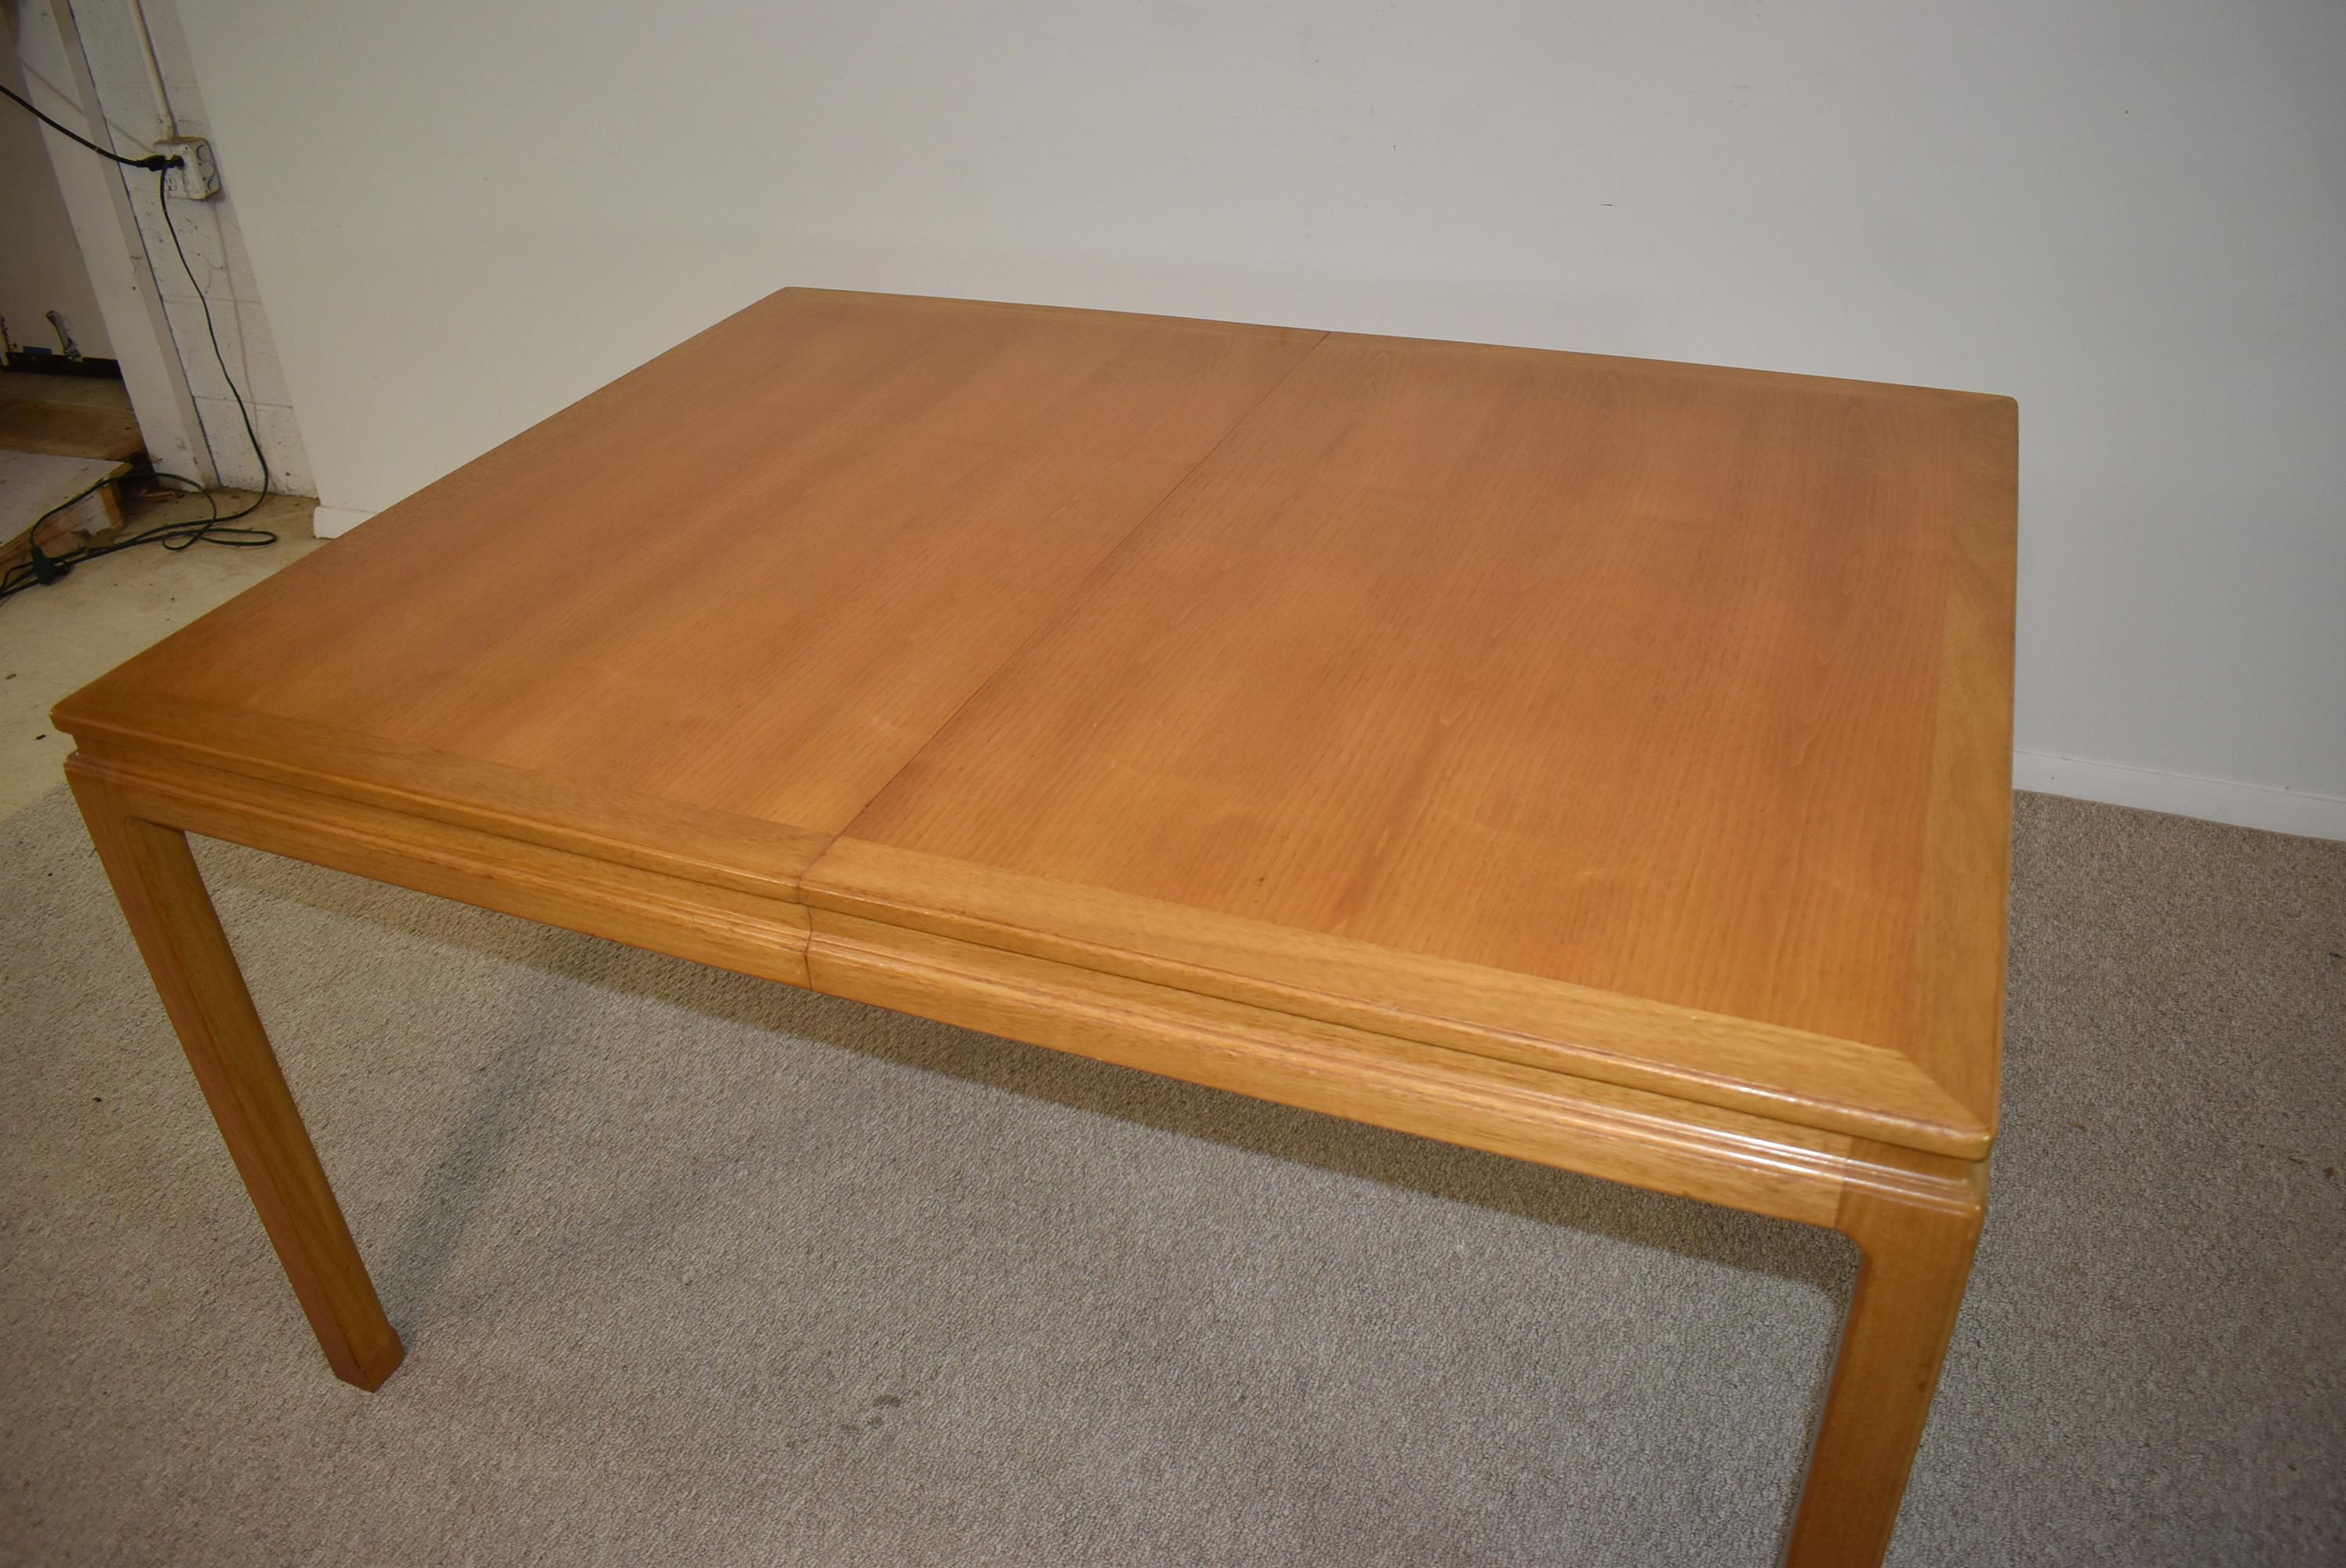 Bleached Mahogany Dining Table with Two Leaves by Edward Wormley for Dunbar For Sale